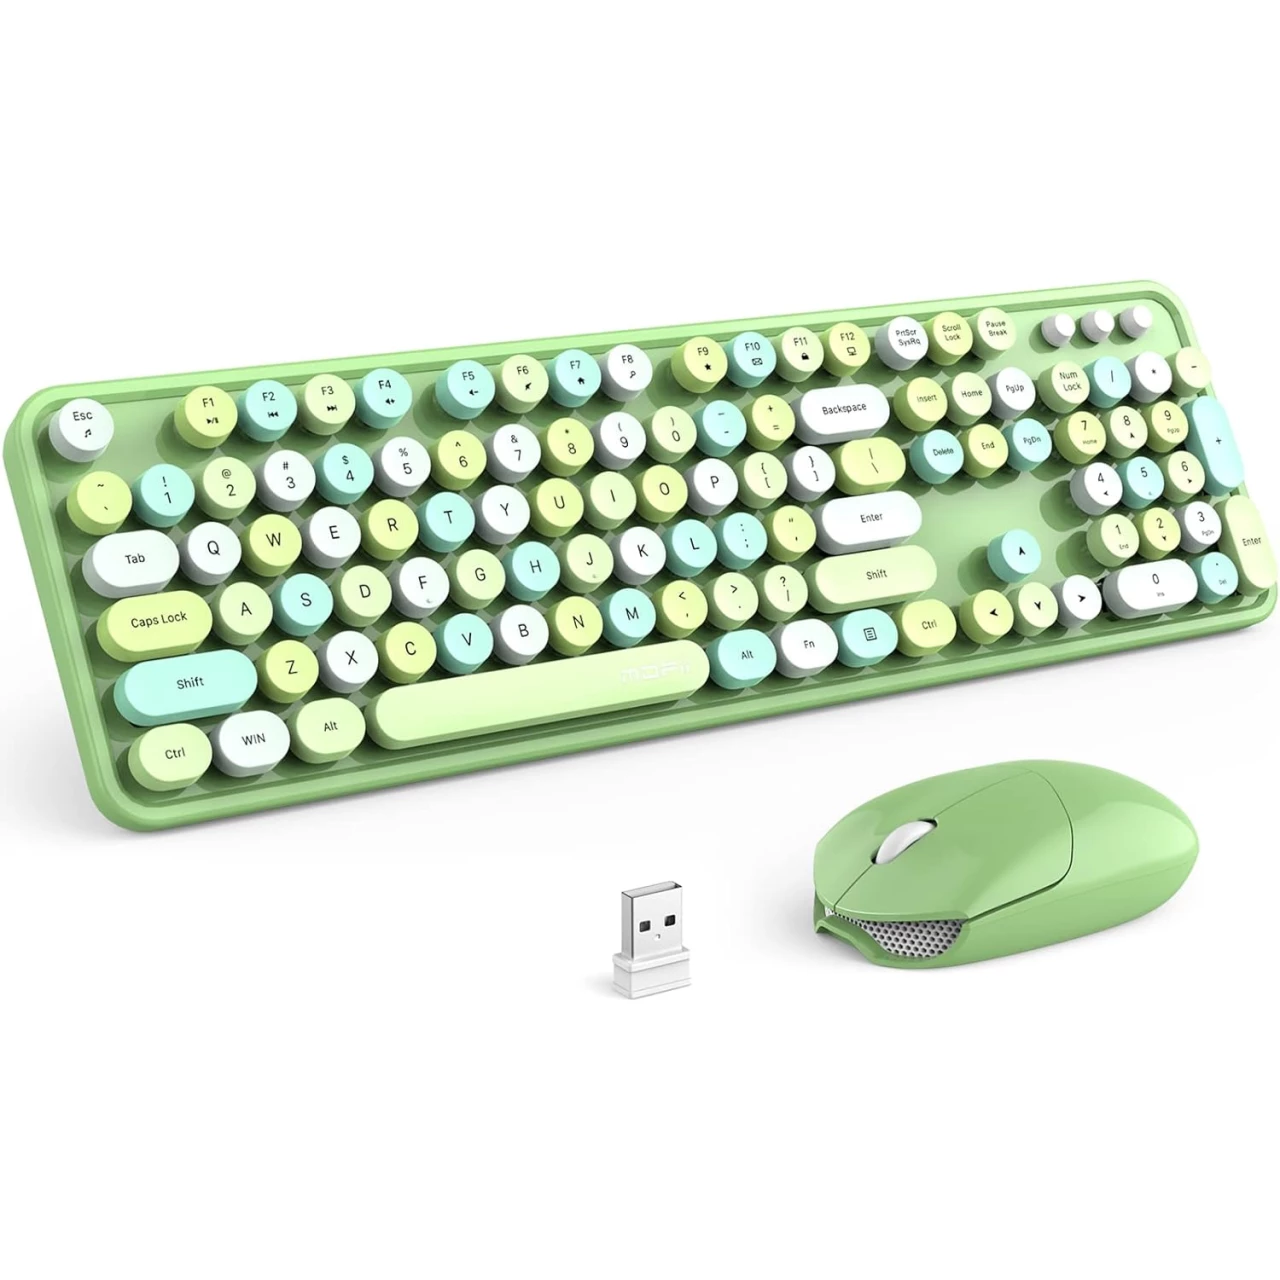 MOFII Wireless Keyboard and Mouse Combo, 2.4GHz Retro Full Size Typewriter Keyboard with Number Pad &amp; Wireless Mouse for Laptop, PC, Desktop, Mac, Windows - Green Colorful